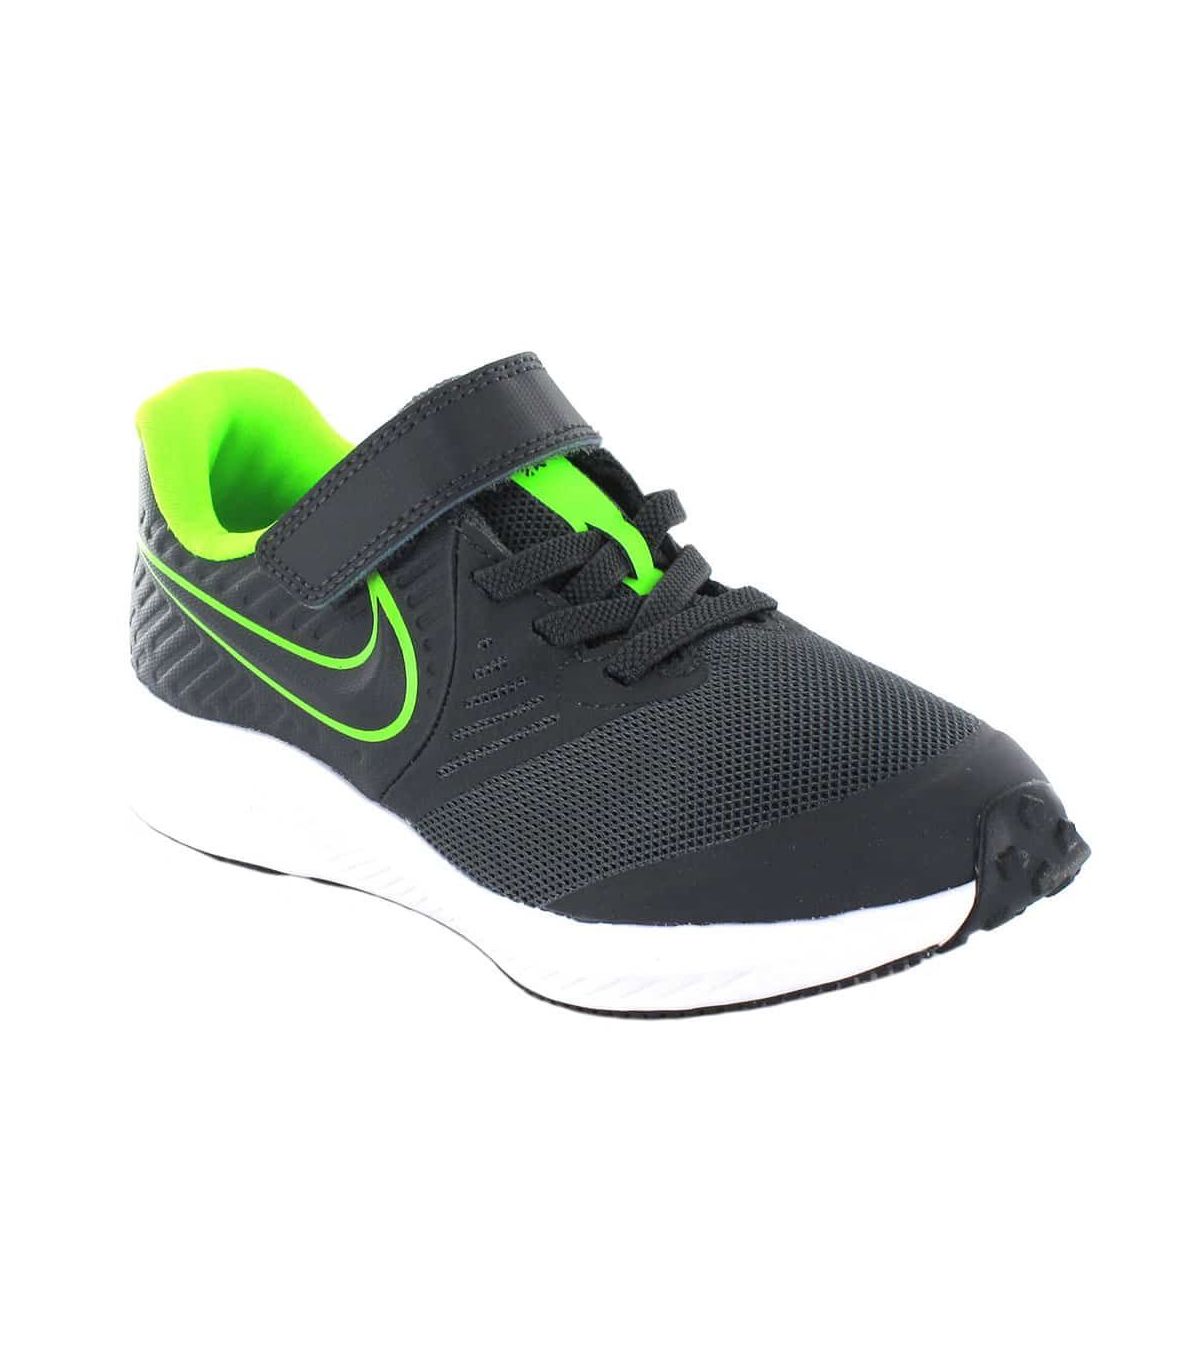 ego Puede ser calculado Física ➤Nike Star Runner 2 PSV 004 - Running Shoes Child Sizes 28.5 Colour Grey